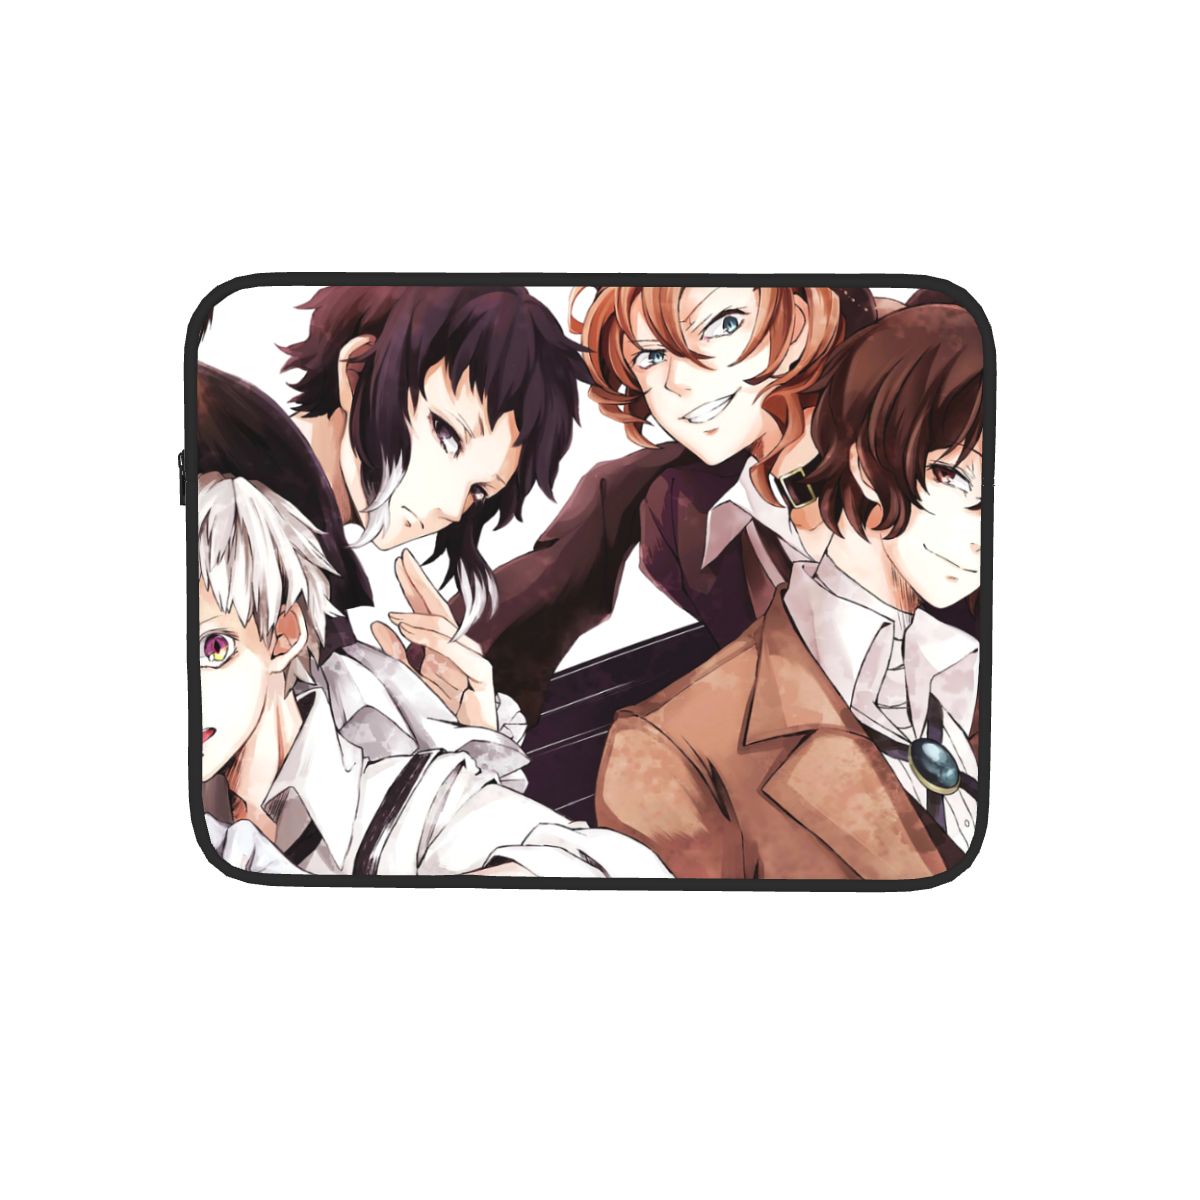 Ensure your devices are protected at all times| If you are looking for more Bungo Stray Dogs Merch, We have it all! | Check out all our Anime Merch now!